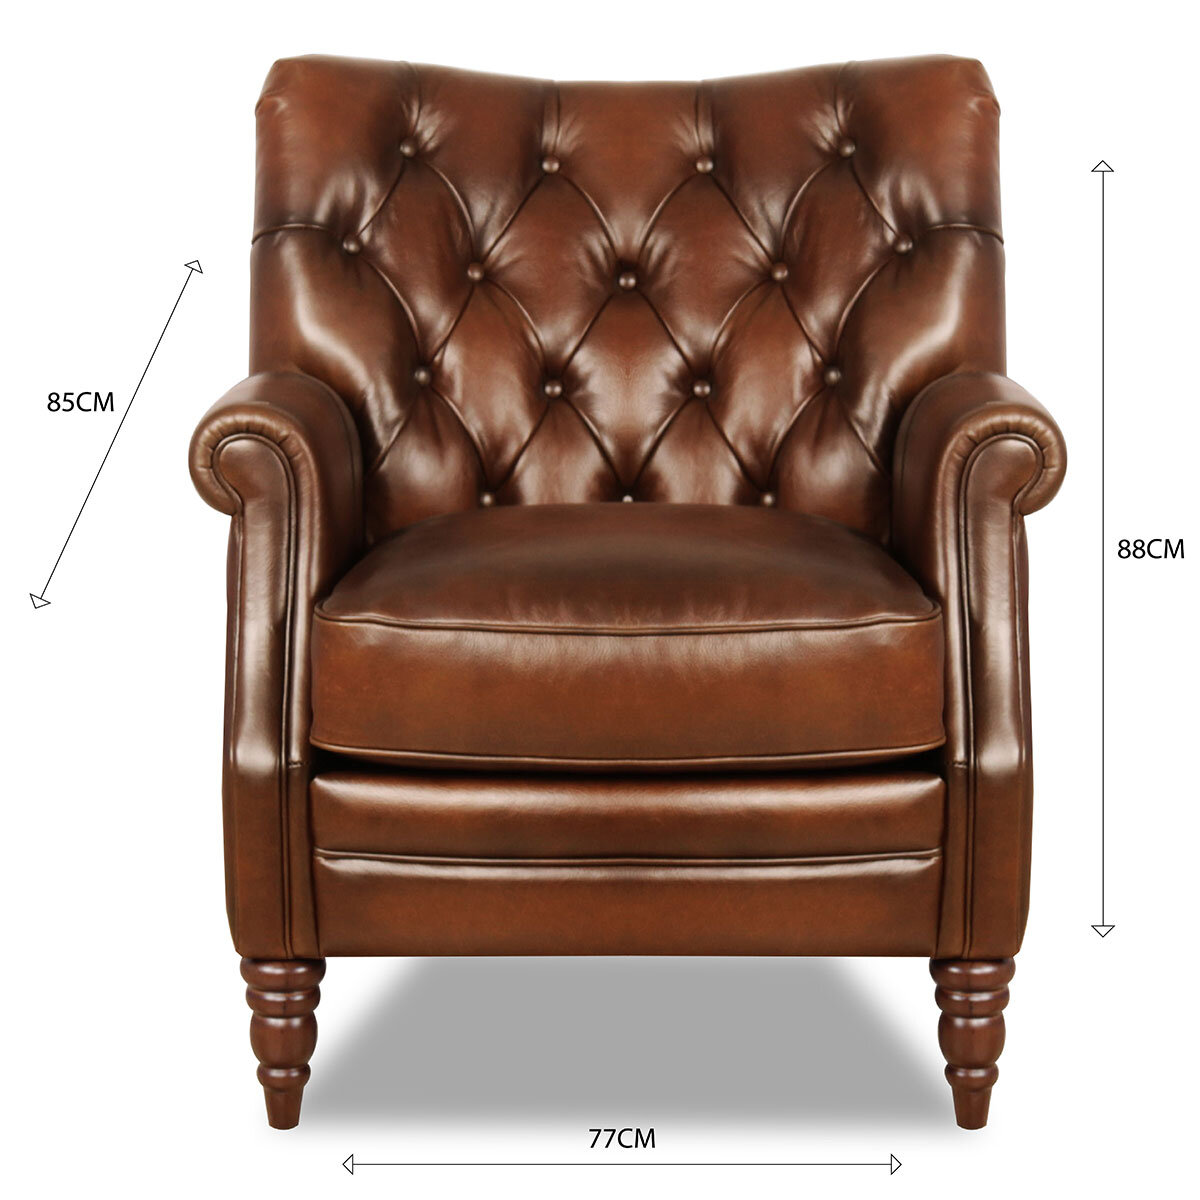 At the helm columbus brown leather armchair